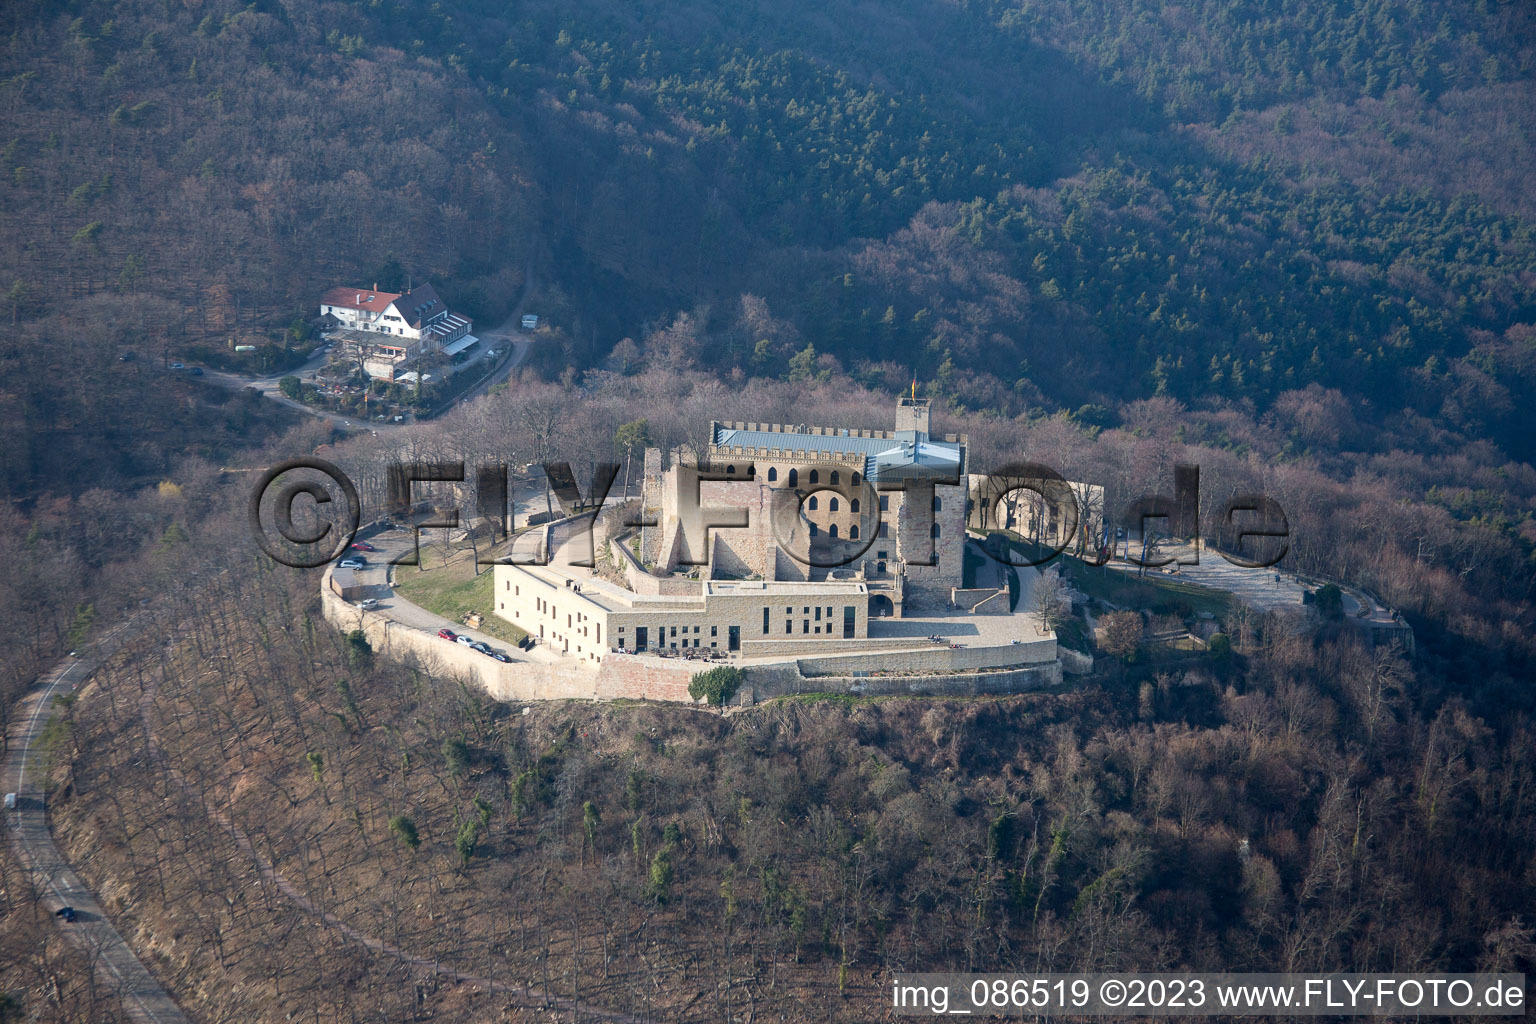 Hambach Castle in the district Diedesfeld in Neustadt an der Weinstraße in the state Rhineland-Palatinate, Germany seen from above